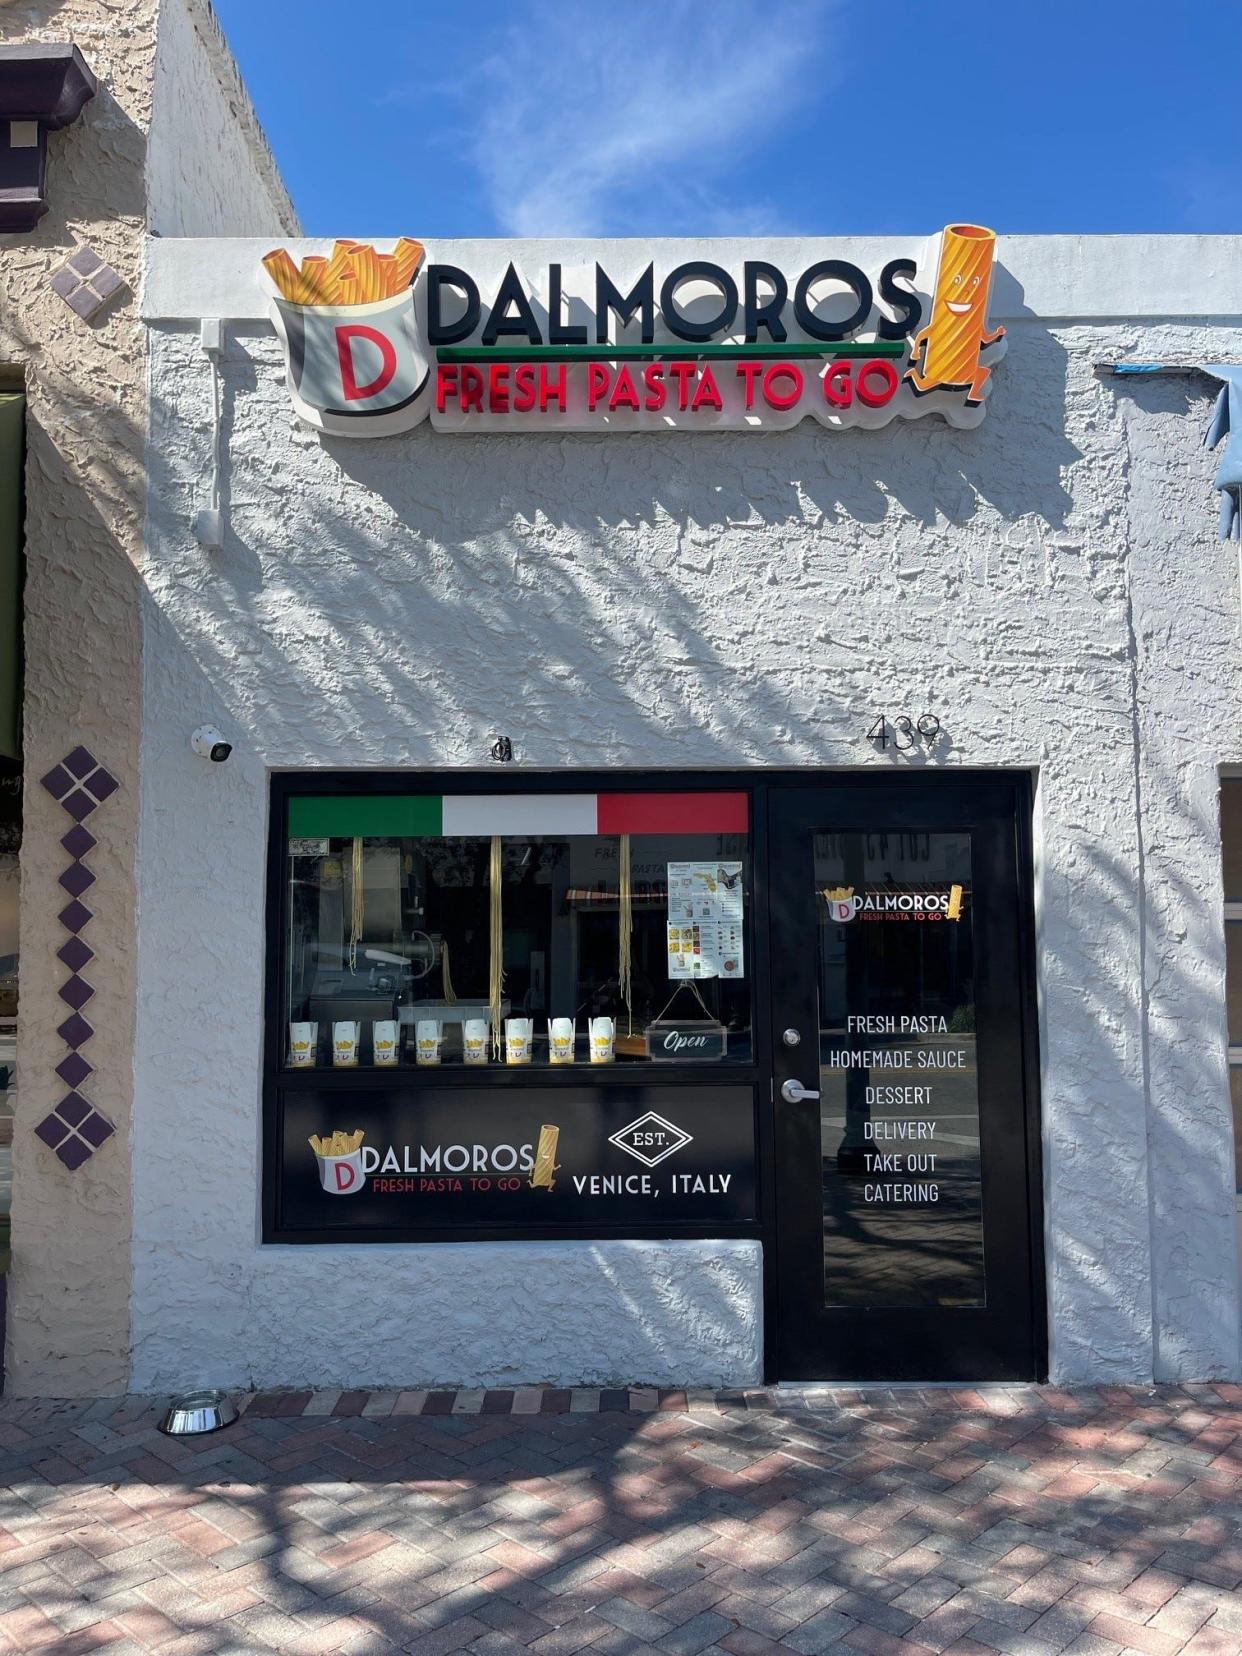 The new DalMoros Fresh Pasta To Go on Atlantic Avenue in Delray Beach opens Friday, Sept. 22. The restaurant is the fourth in the United States joining locations in Tampa, St. Petersburg and Sarasota.